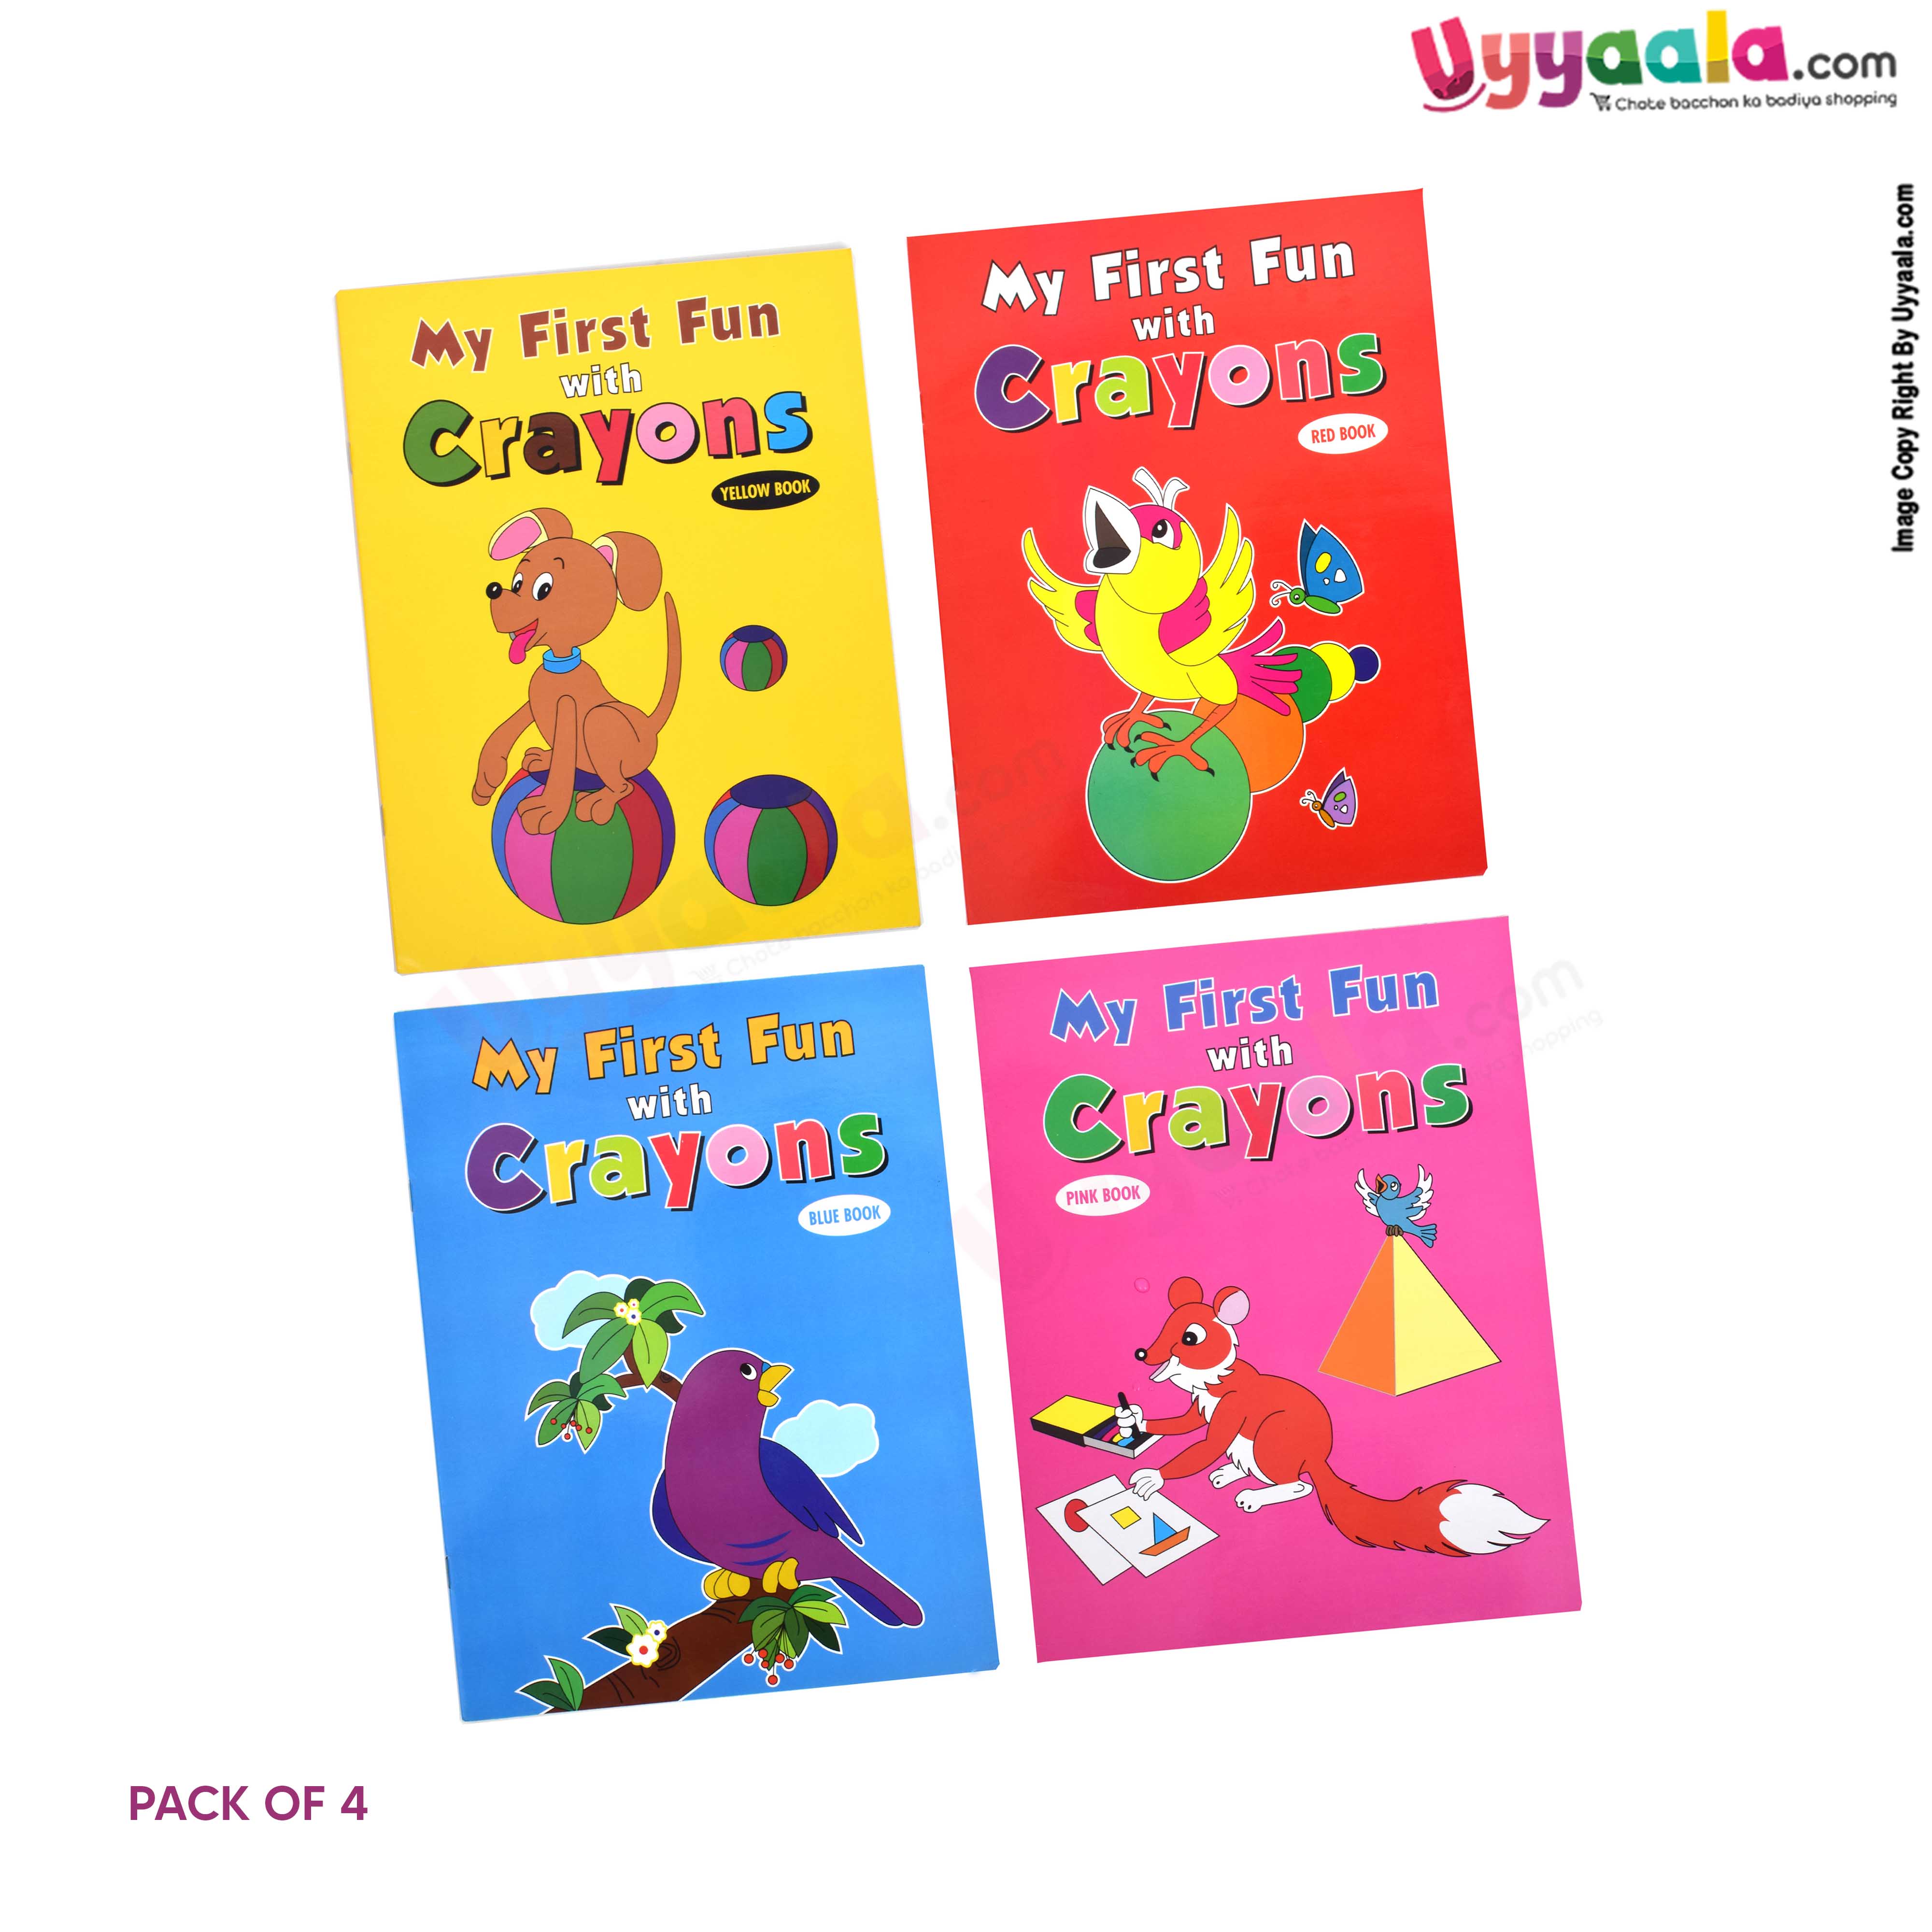 My first fun with crayons - fun activity books, pack of 4 - 4 volumes (2 - 6 years)